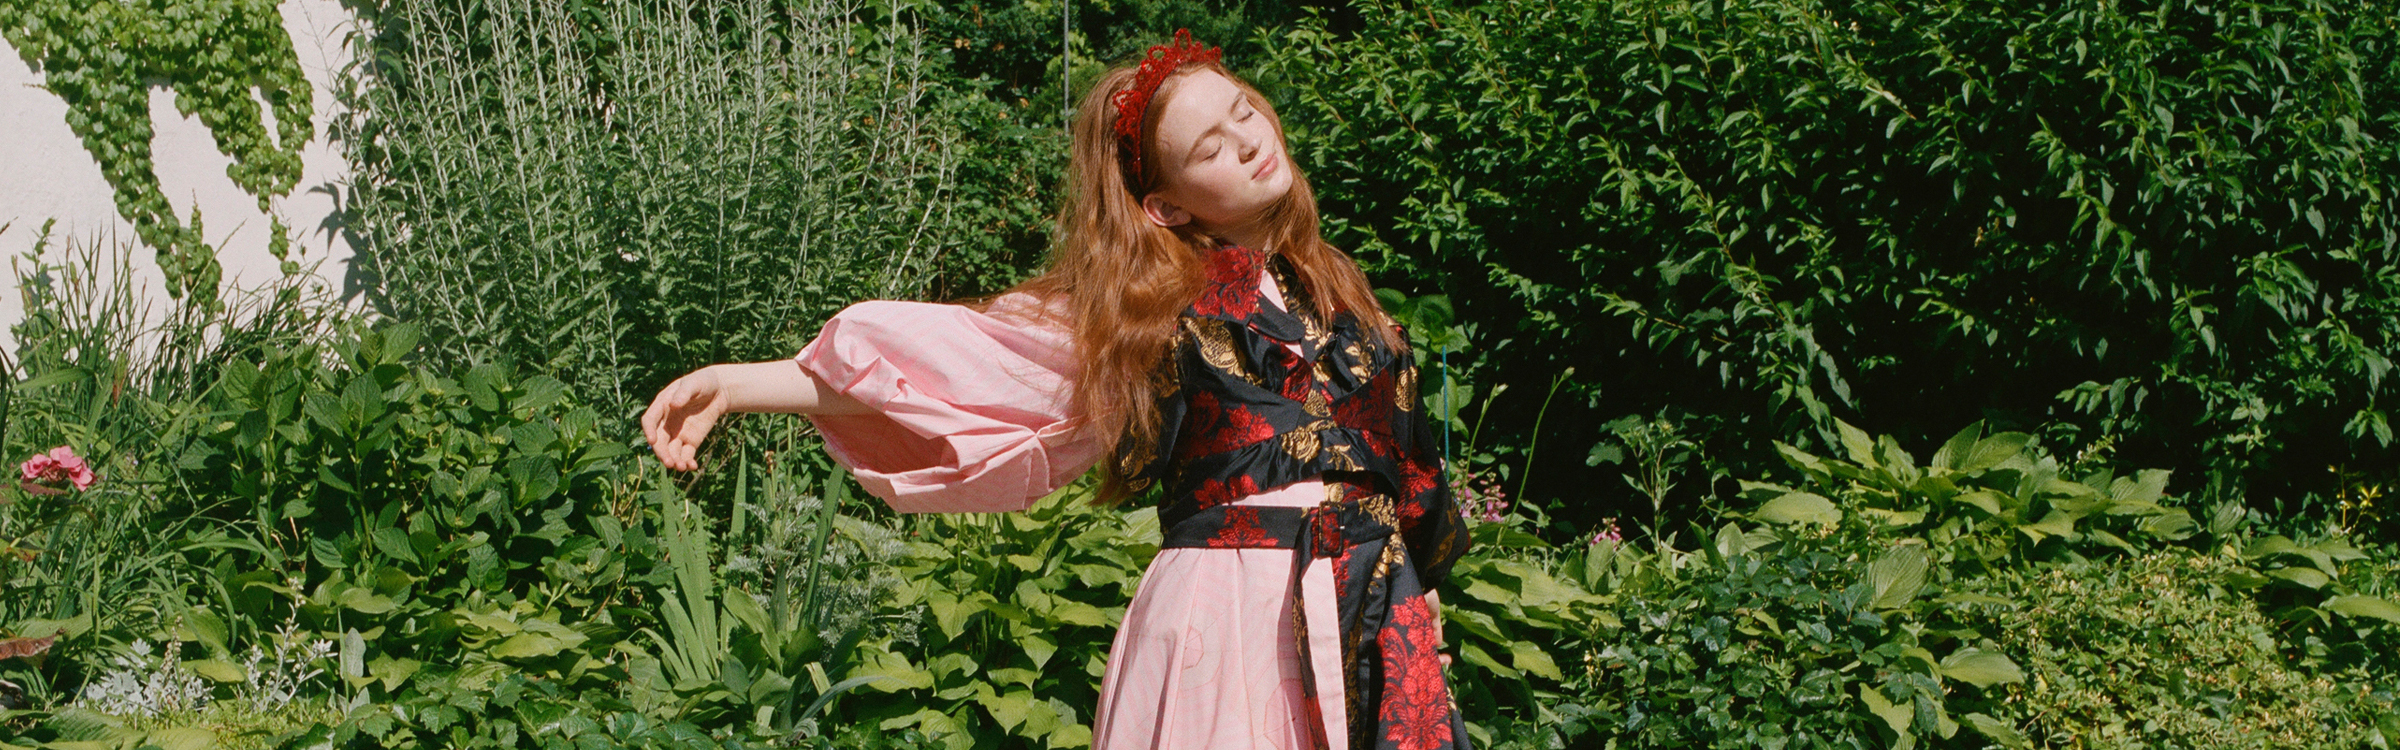 Sadie Sink Doesn't Want You to Define Her Style, Thank You Very Much